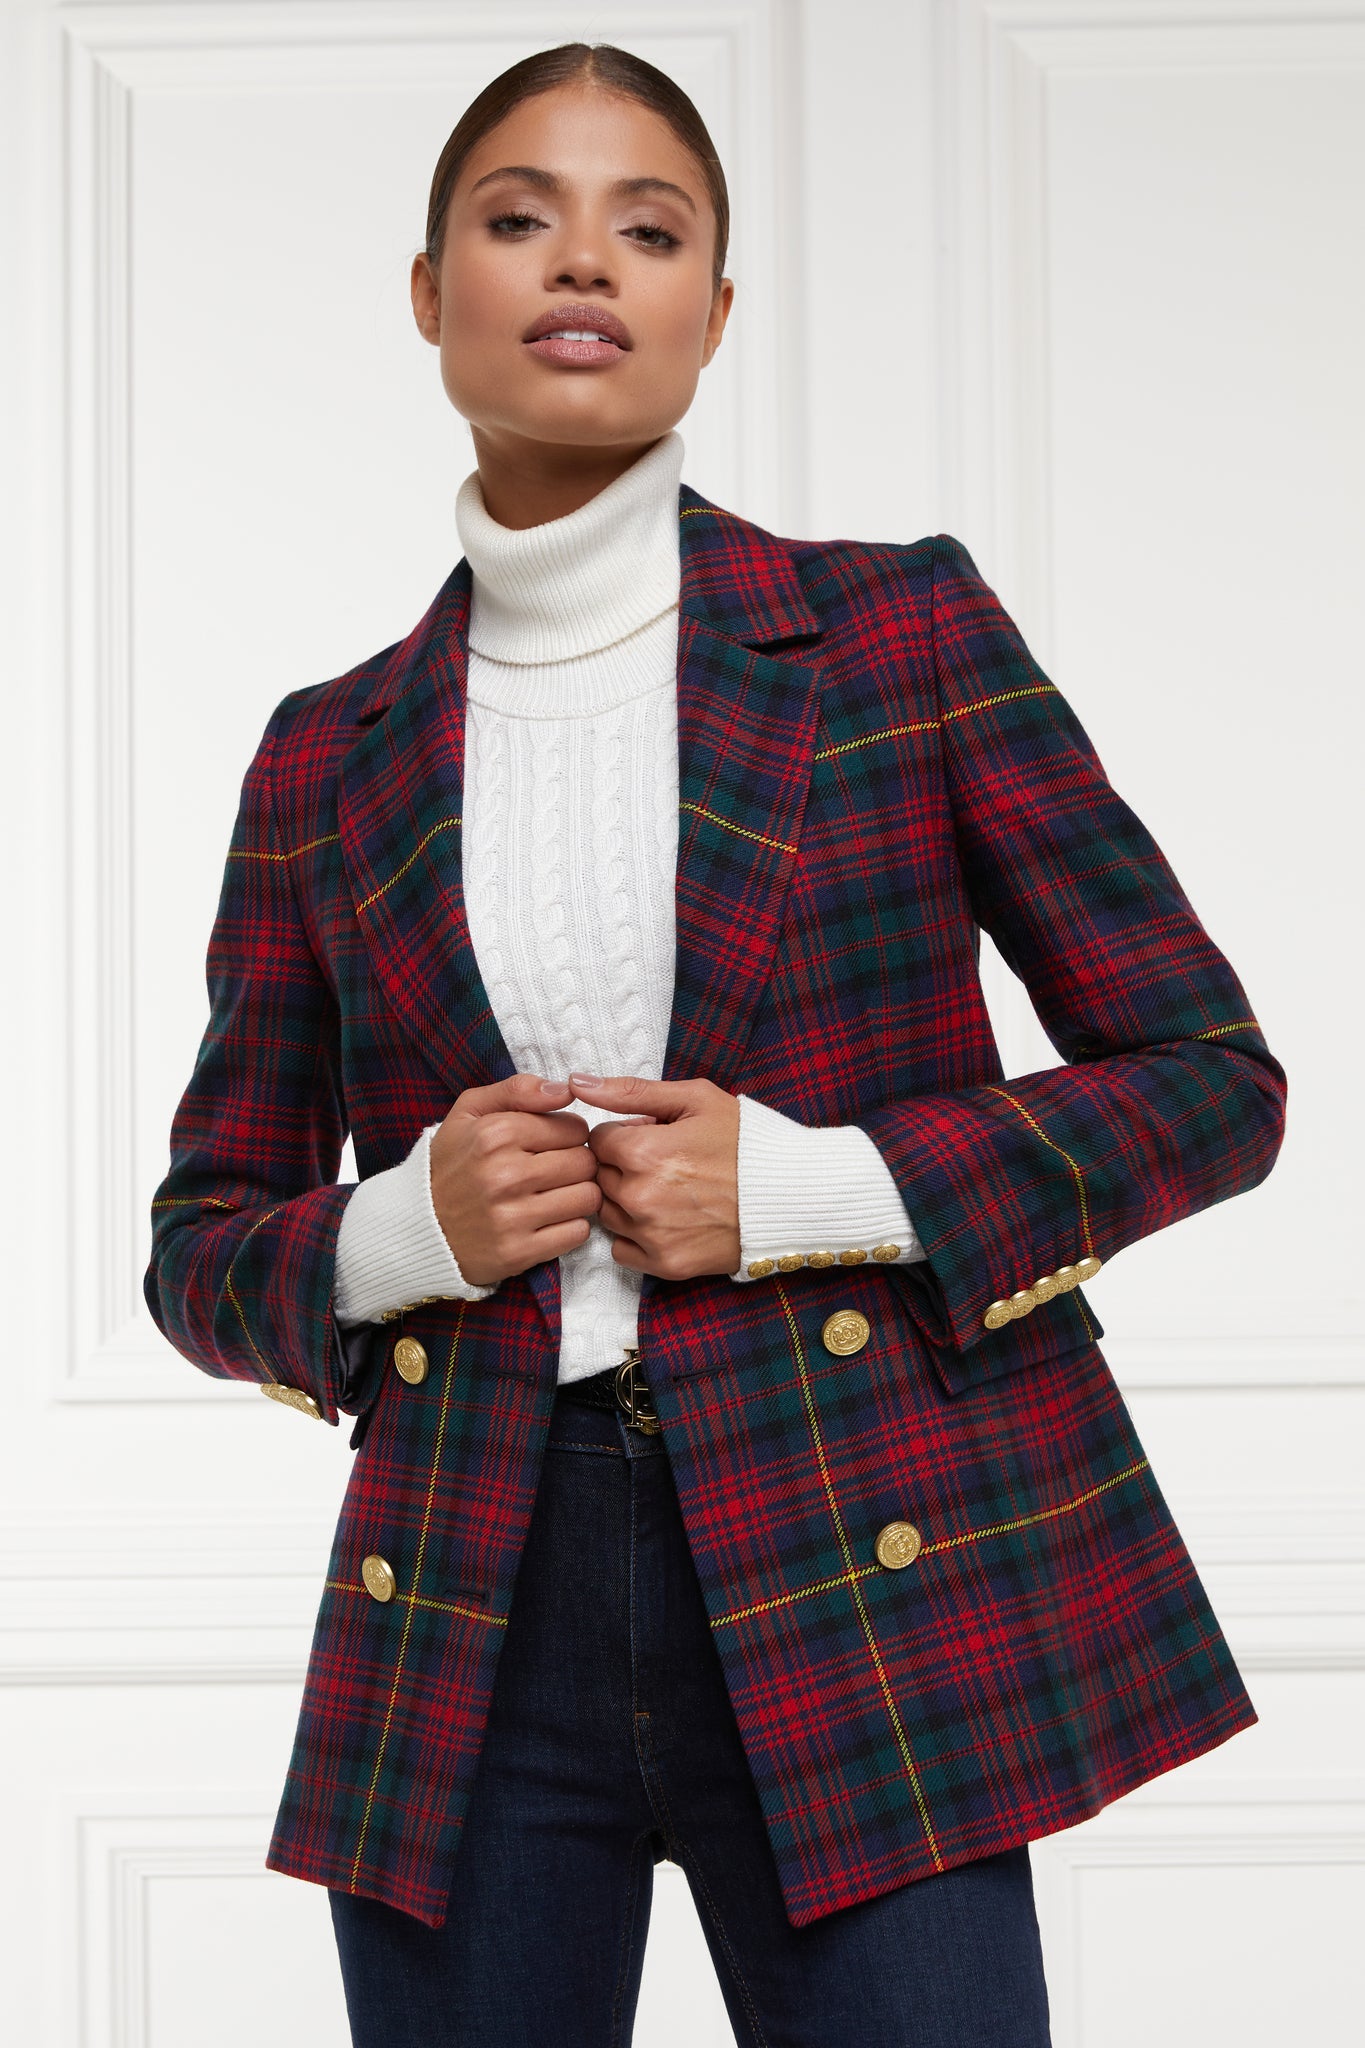 double breasted wool blazer in dark red navy green and yellow logan tartan with two hip pockets and gold button details down front and on cuffs and handmade in the uk